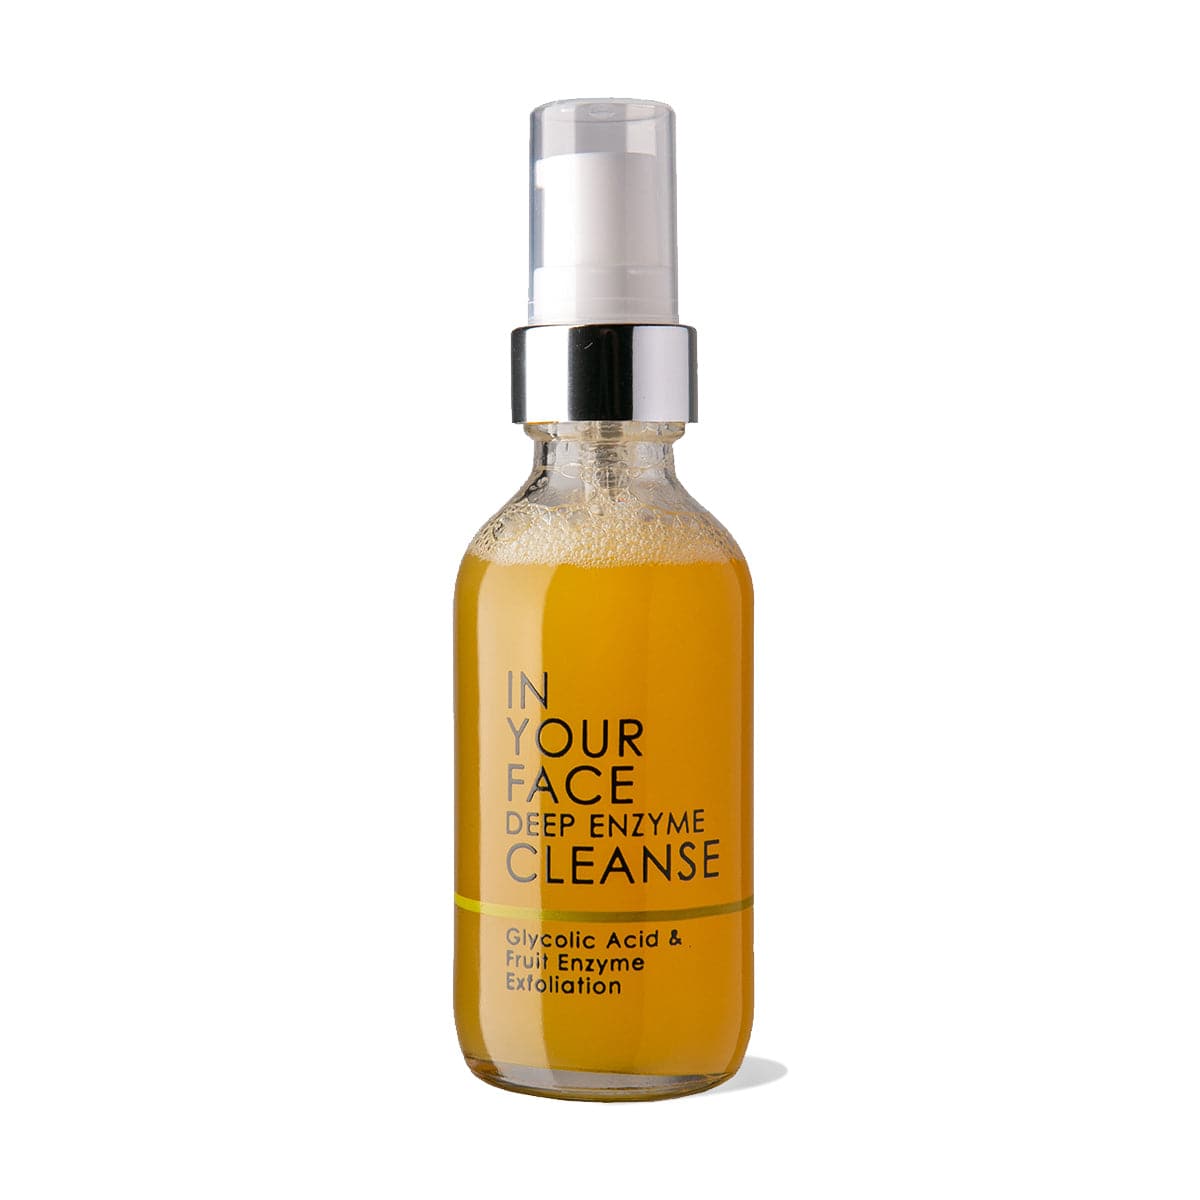 a bottle of IN YOUR FACE DEEP ENZYME CLEANSE on a white background. The bottle also says "Glycolic Acid & Fruit Enzyme Exfoliation". It's with a pump dispenser and the product inside is an orange color.